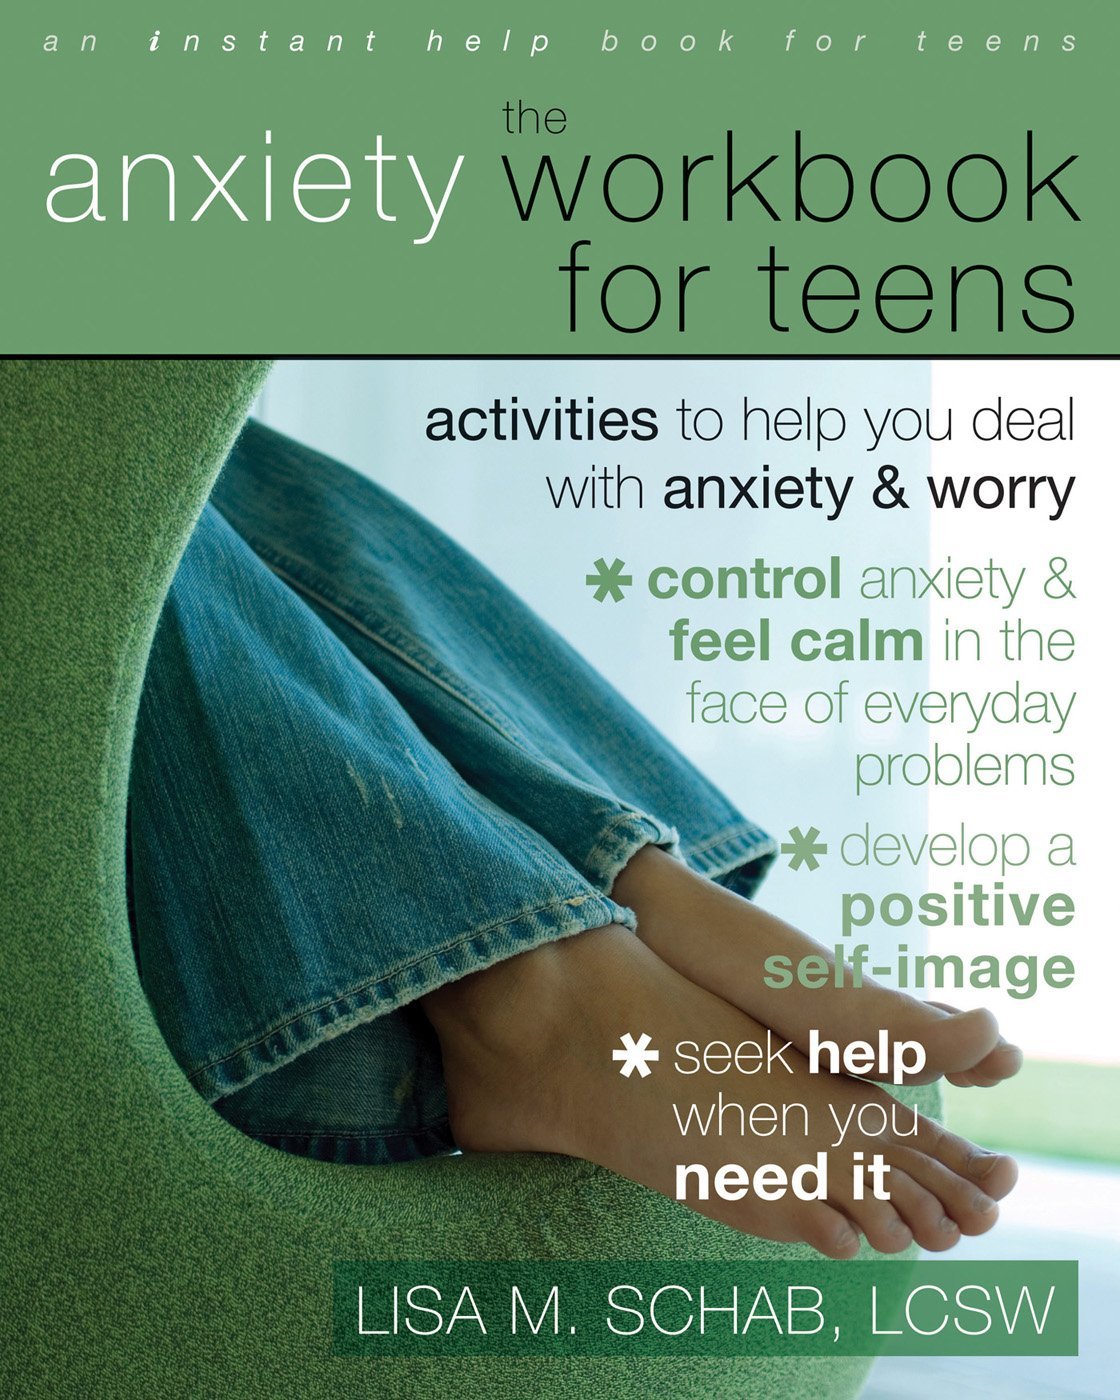 The Anxiety Workbook for Teens. Activities to Help You Deal with Anxiety & Worry. Activities to Help You Deal with Anxiety and Worry